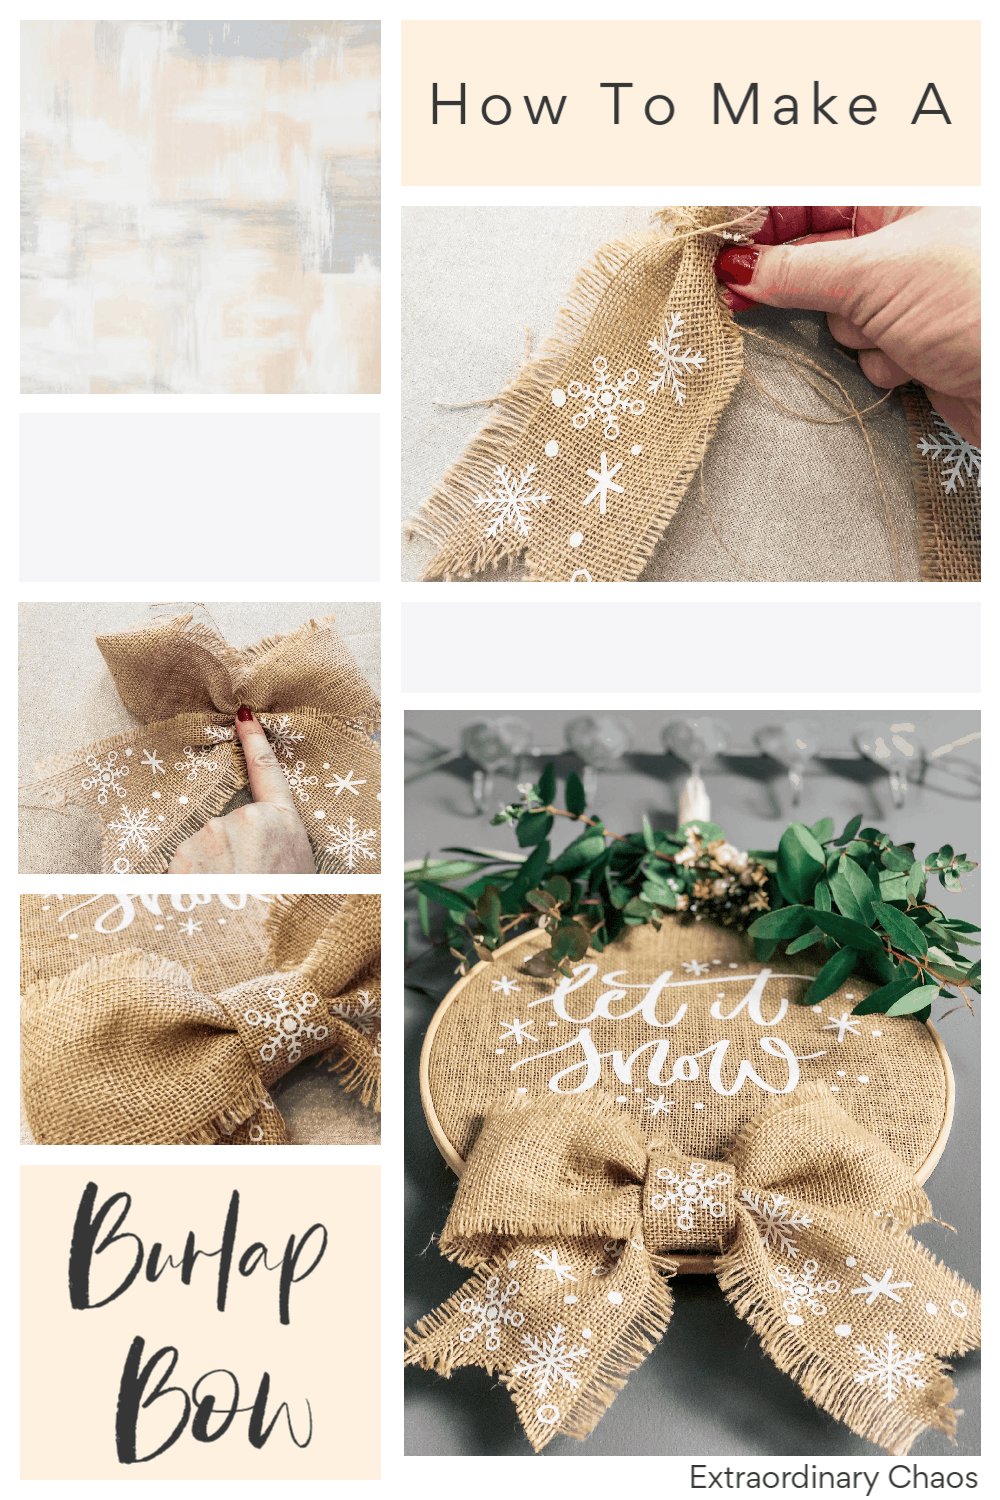 How To Make A Burlap Bow